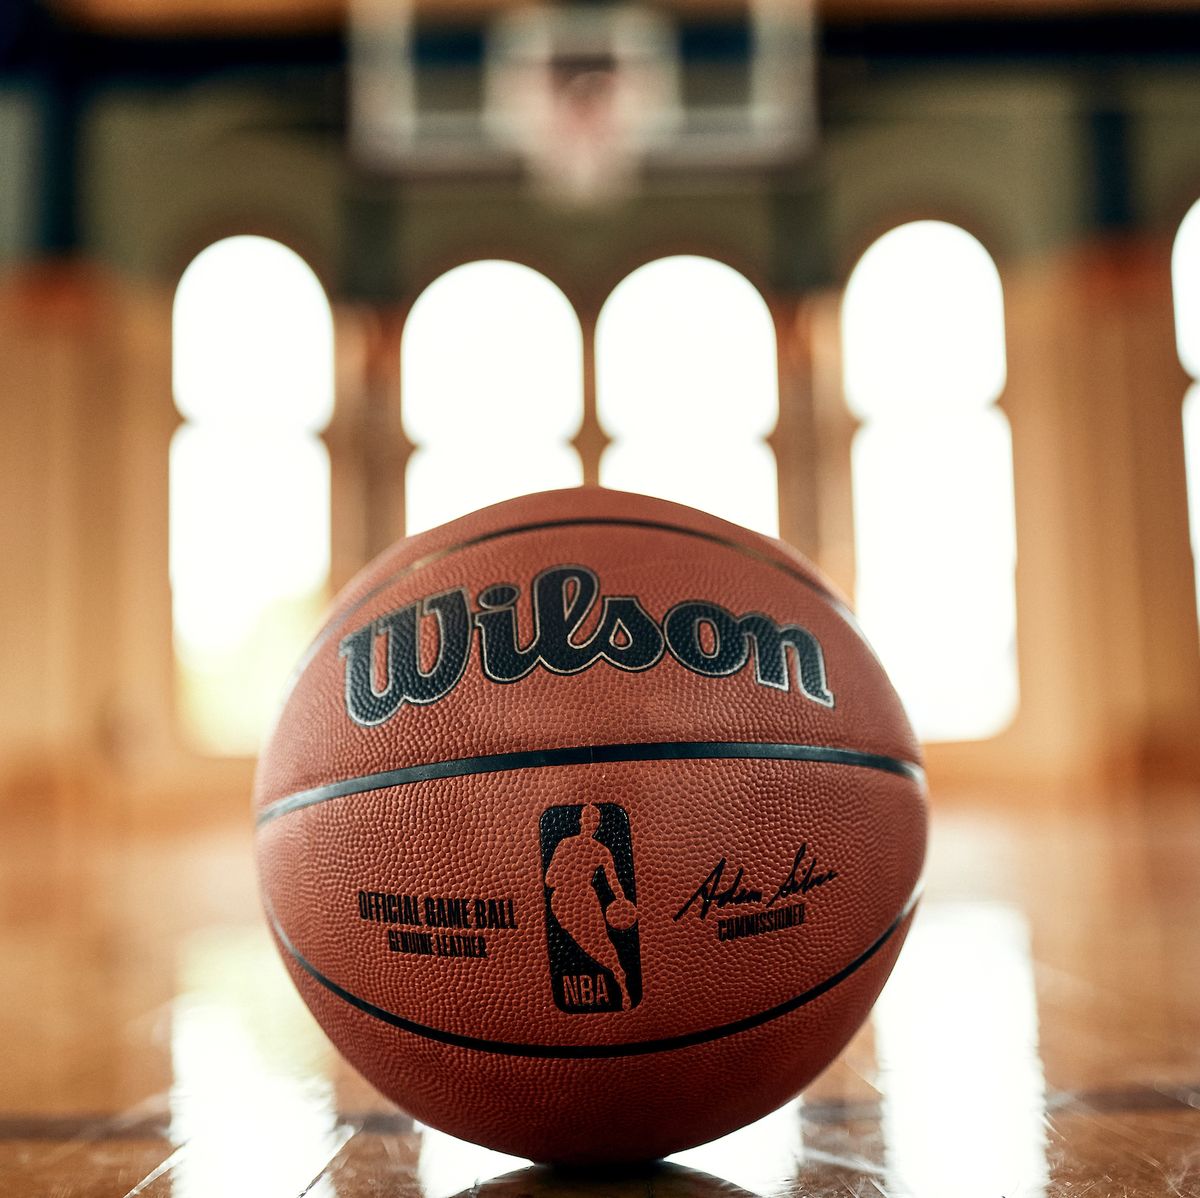 Sources: NBA partners with Wilson to produce official game balls